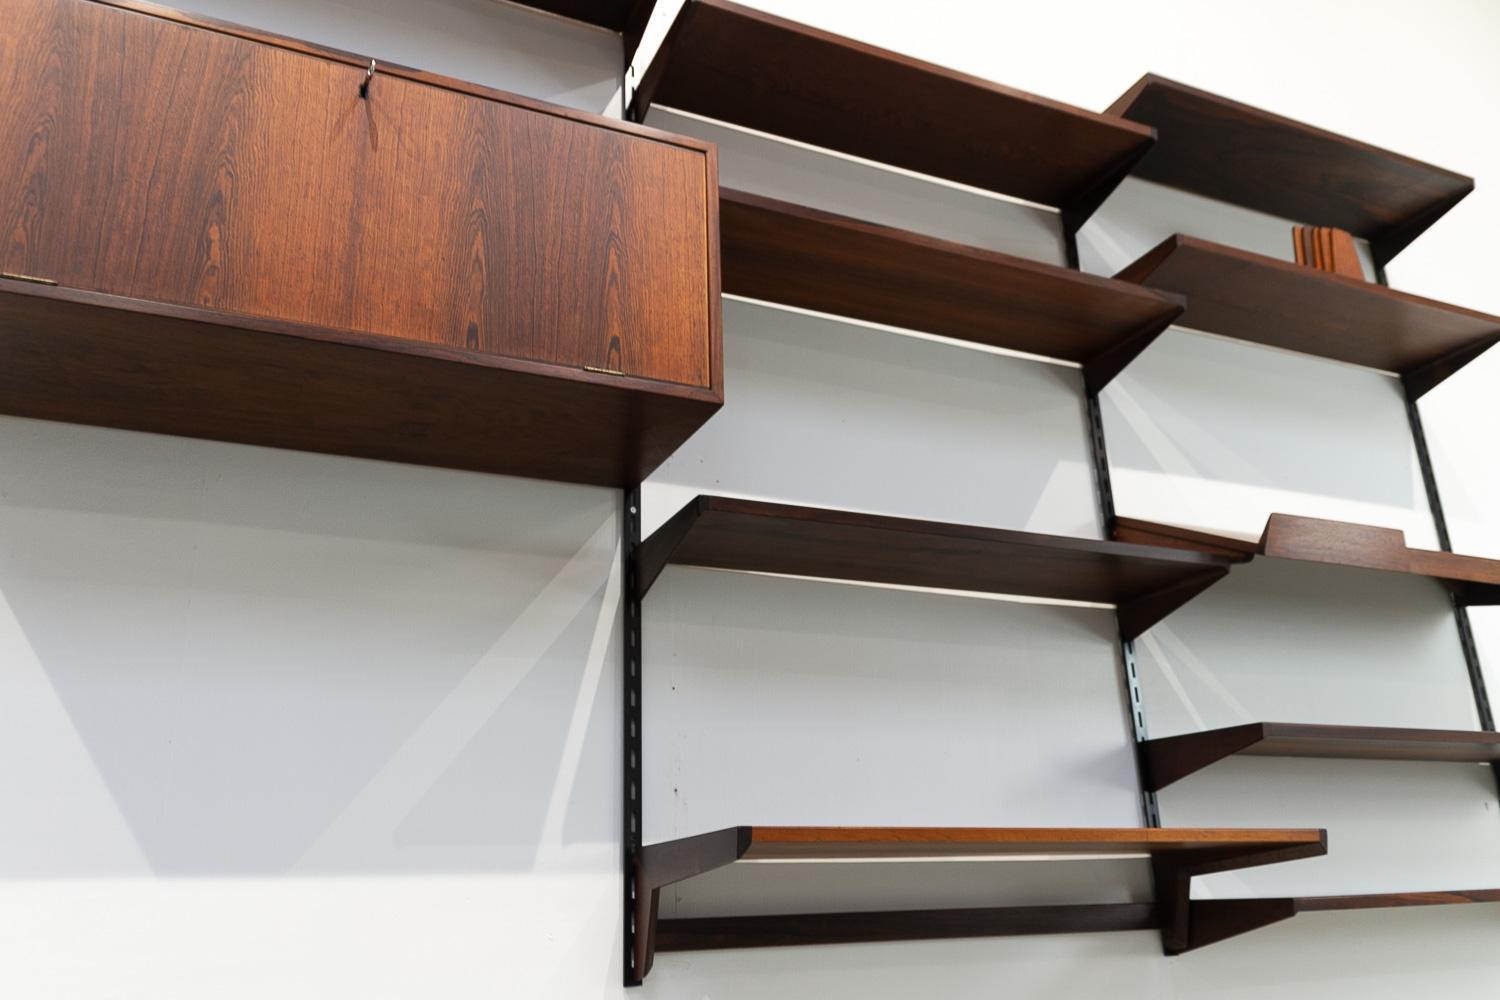 Danish Modern Rosewood 3-Bay Wall Unit by Kai Kristiansen for FM, 1960s For Sale 4